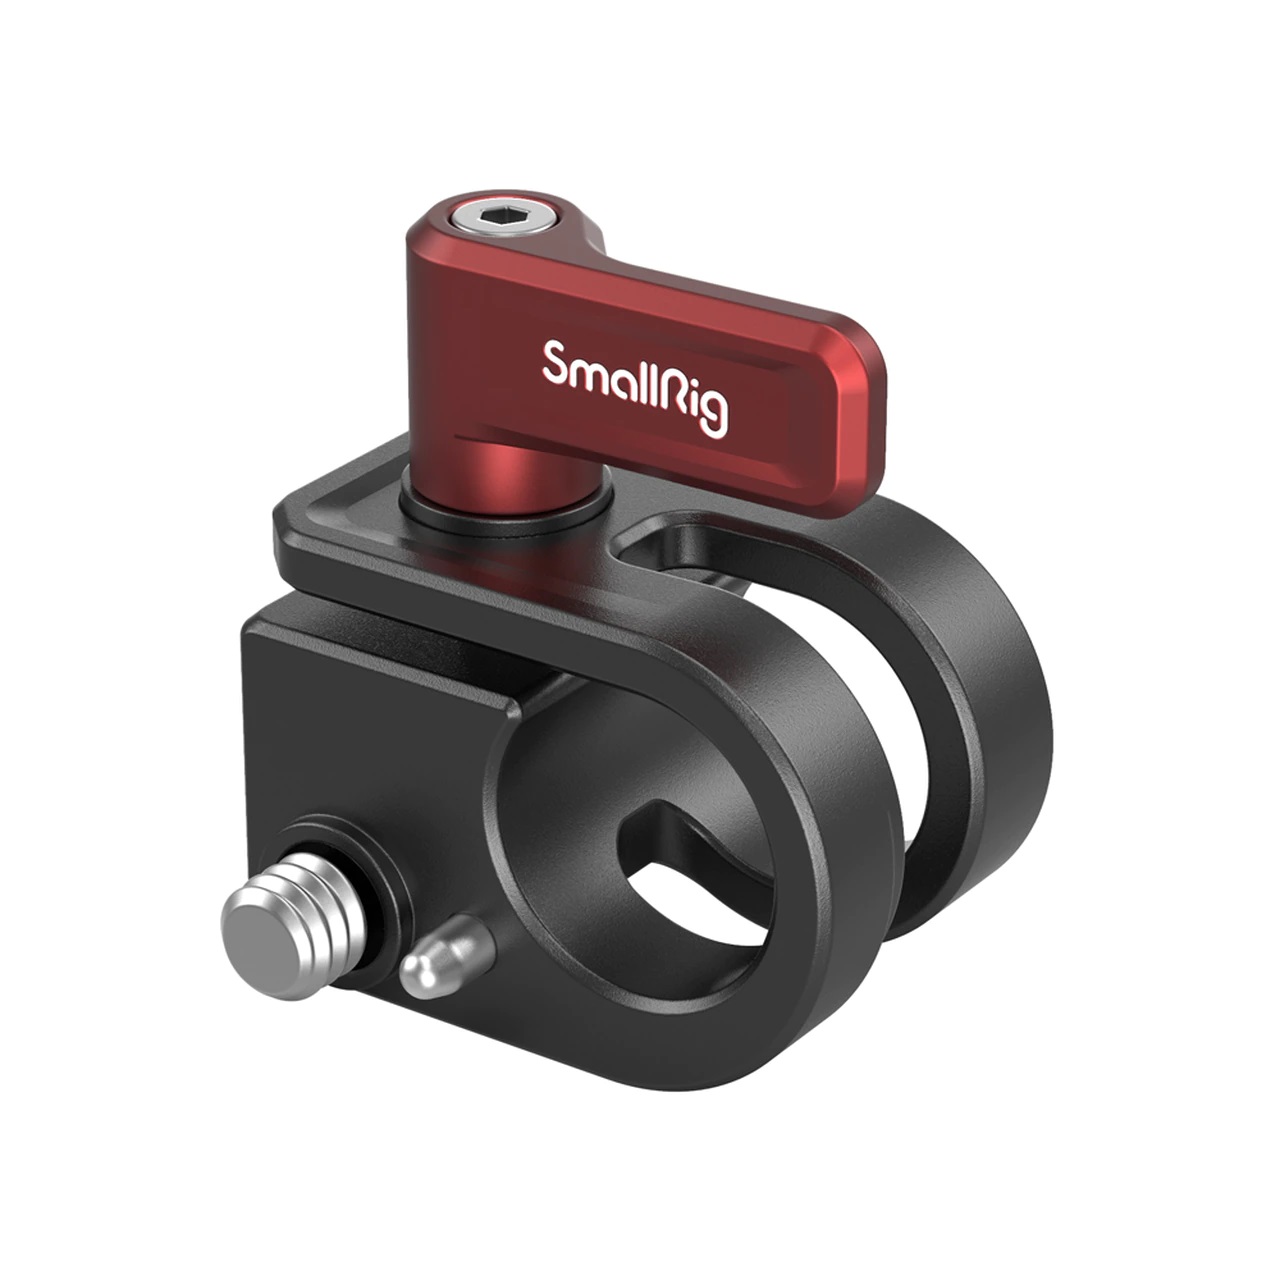 Smallrig 3276 15mm Single Rod Clamp for BMPCC 6K Pro